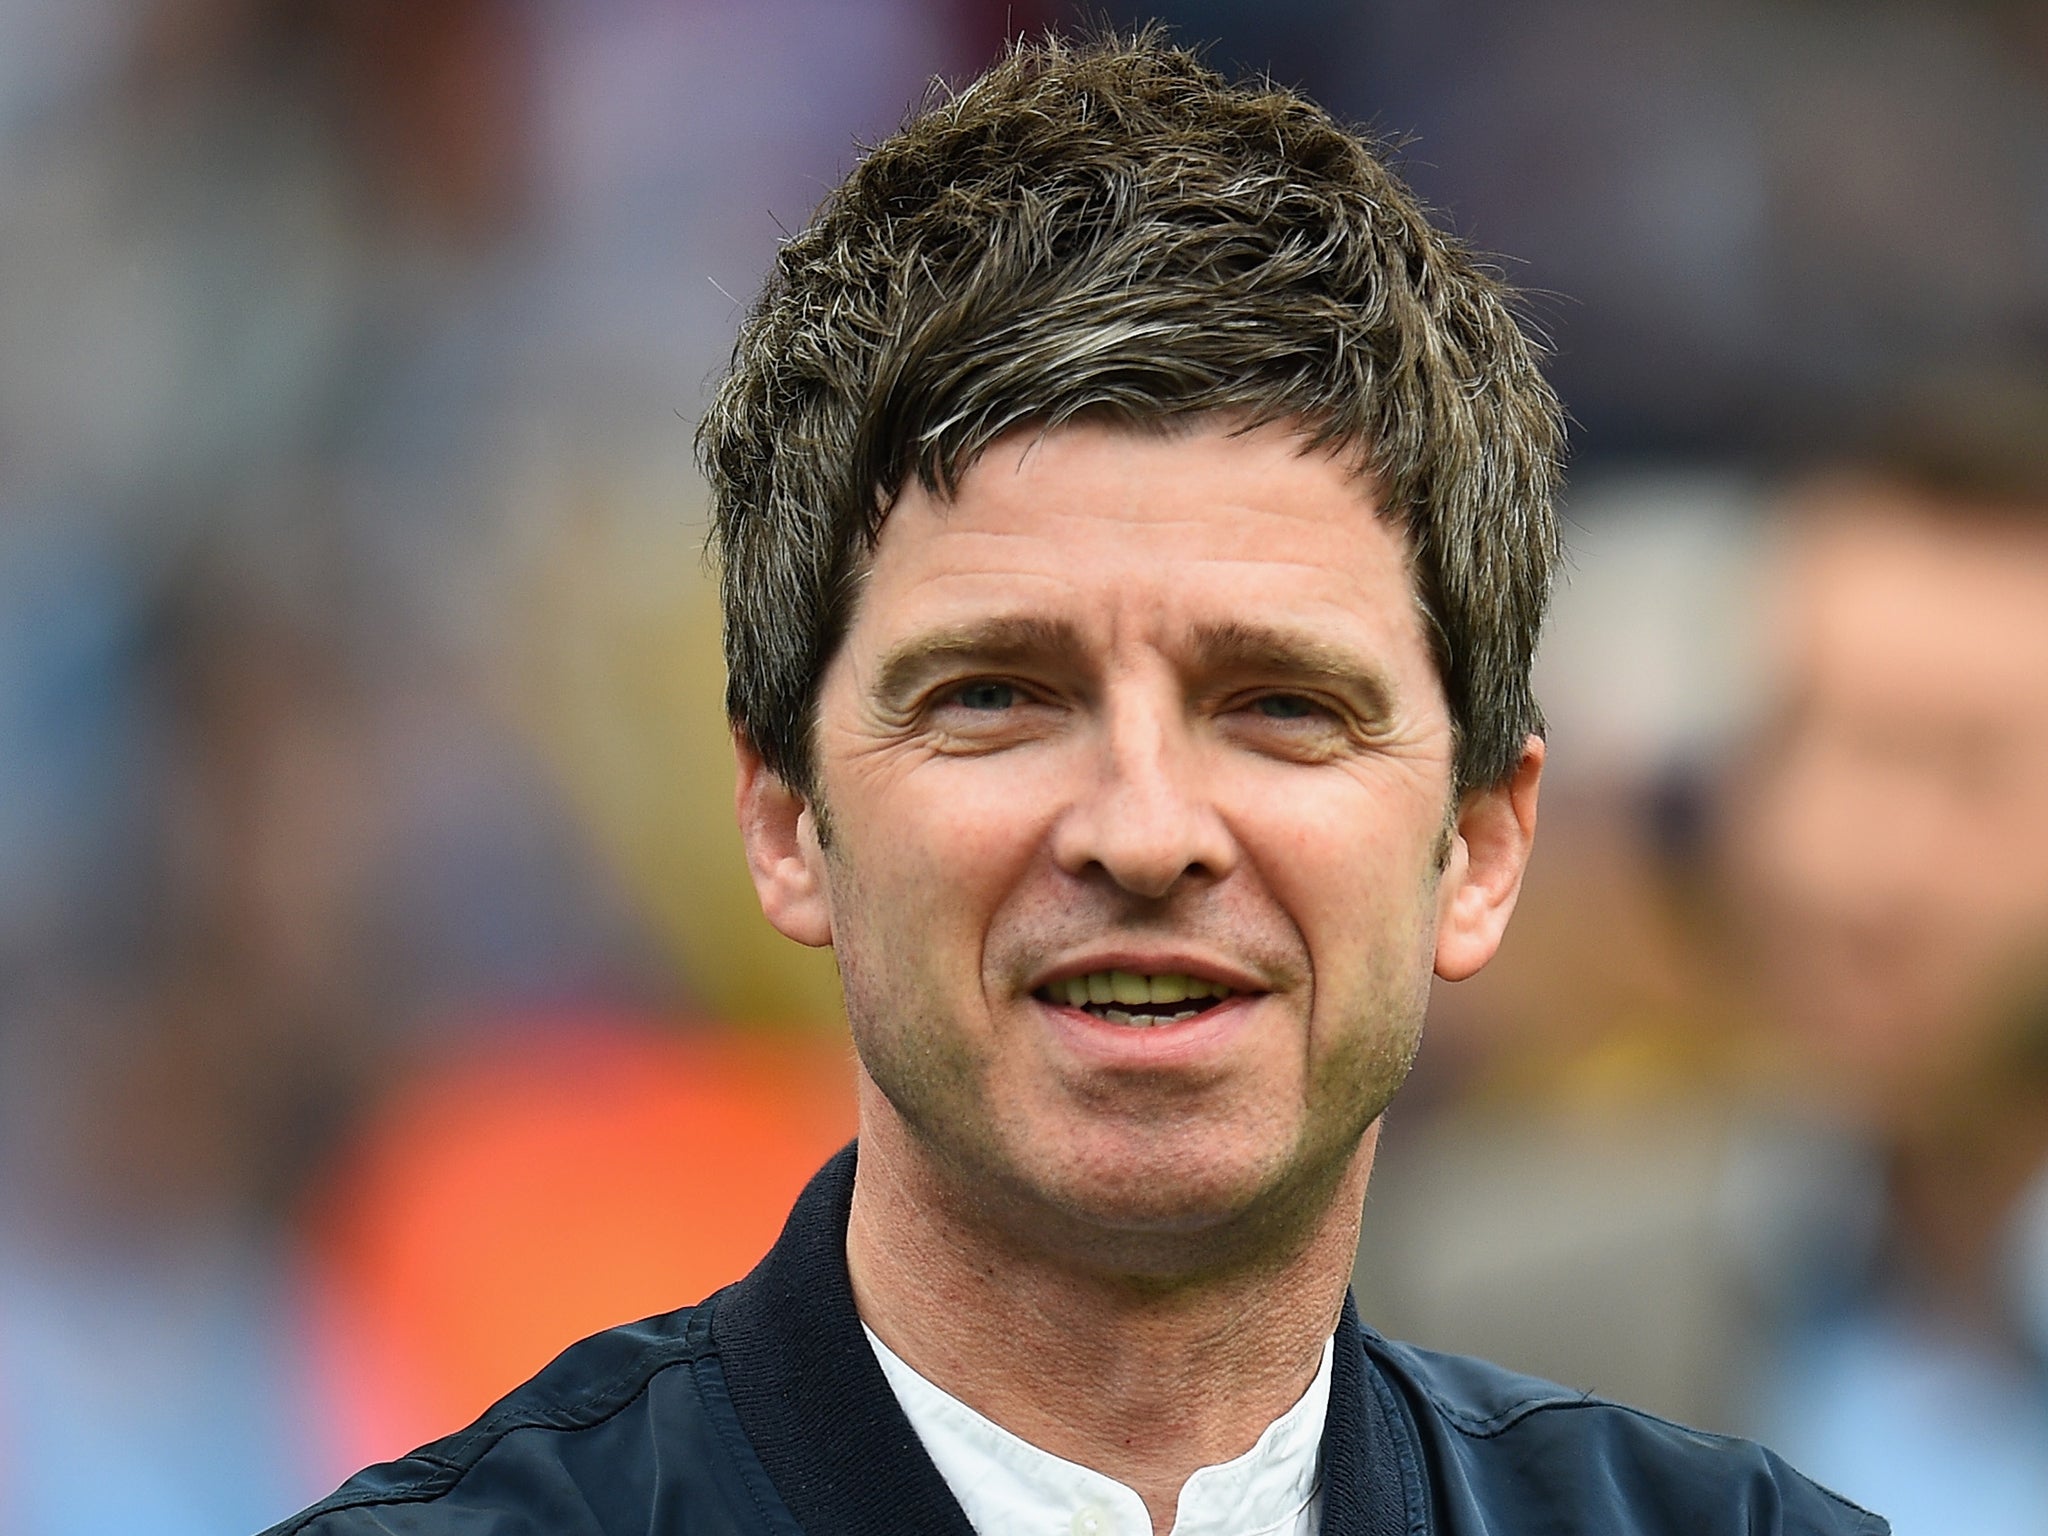 Noel Gallagher said he once hid in a hotel room to avoid the Hole singer